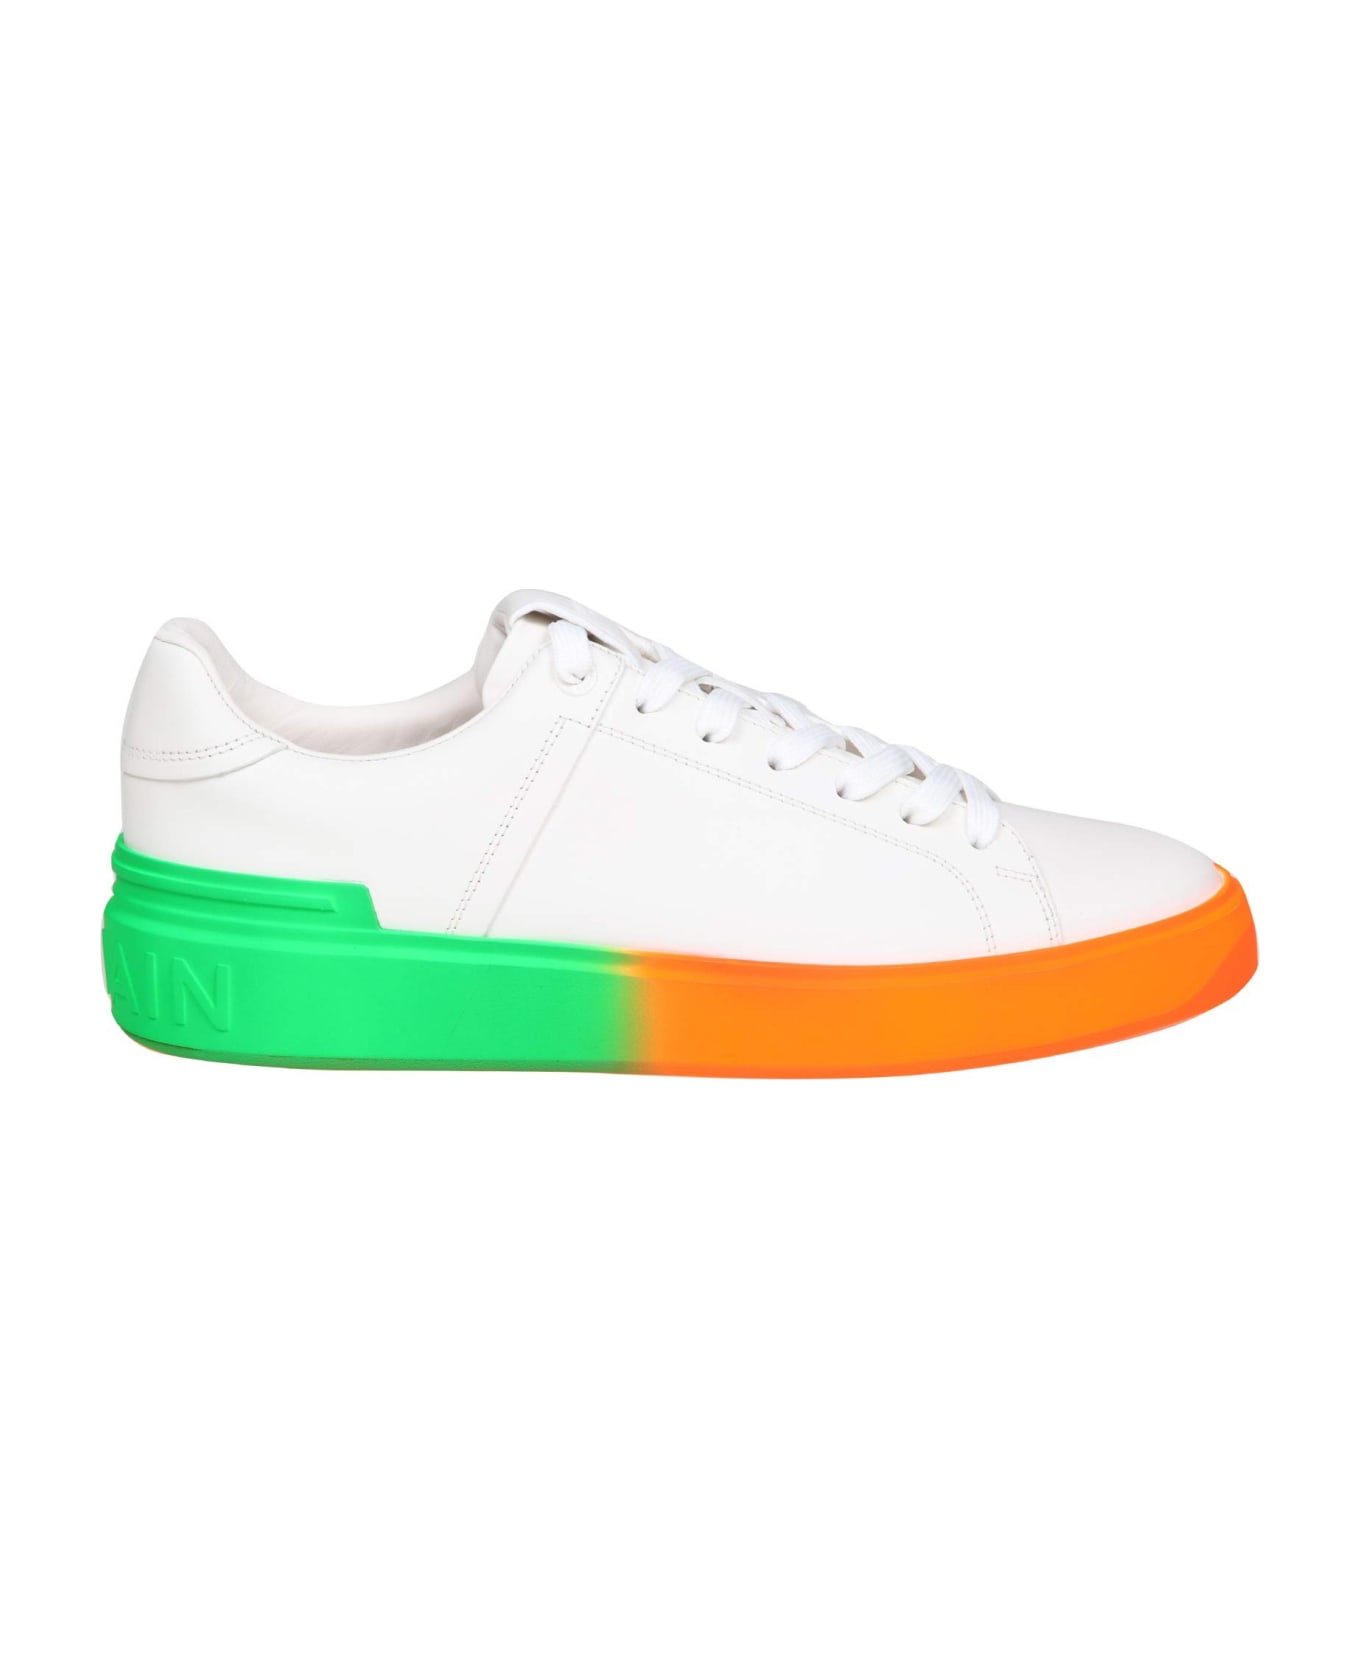 Balmain B Court Sneakers In White Leather With Two-tone Sole - white/multicolor スニーカー